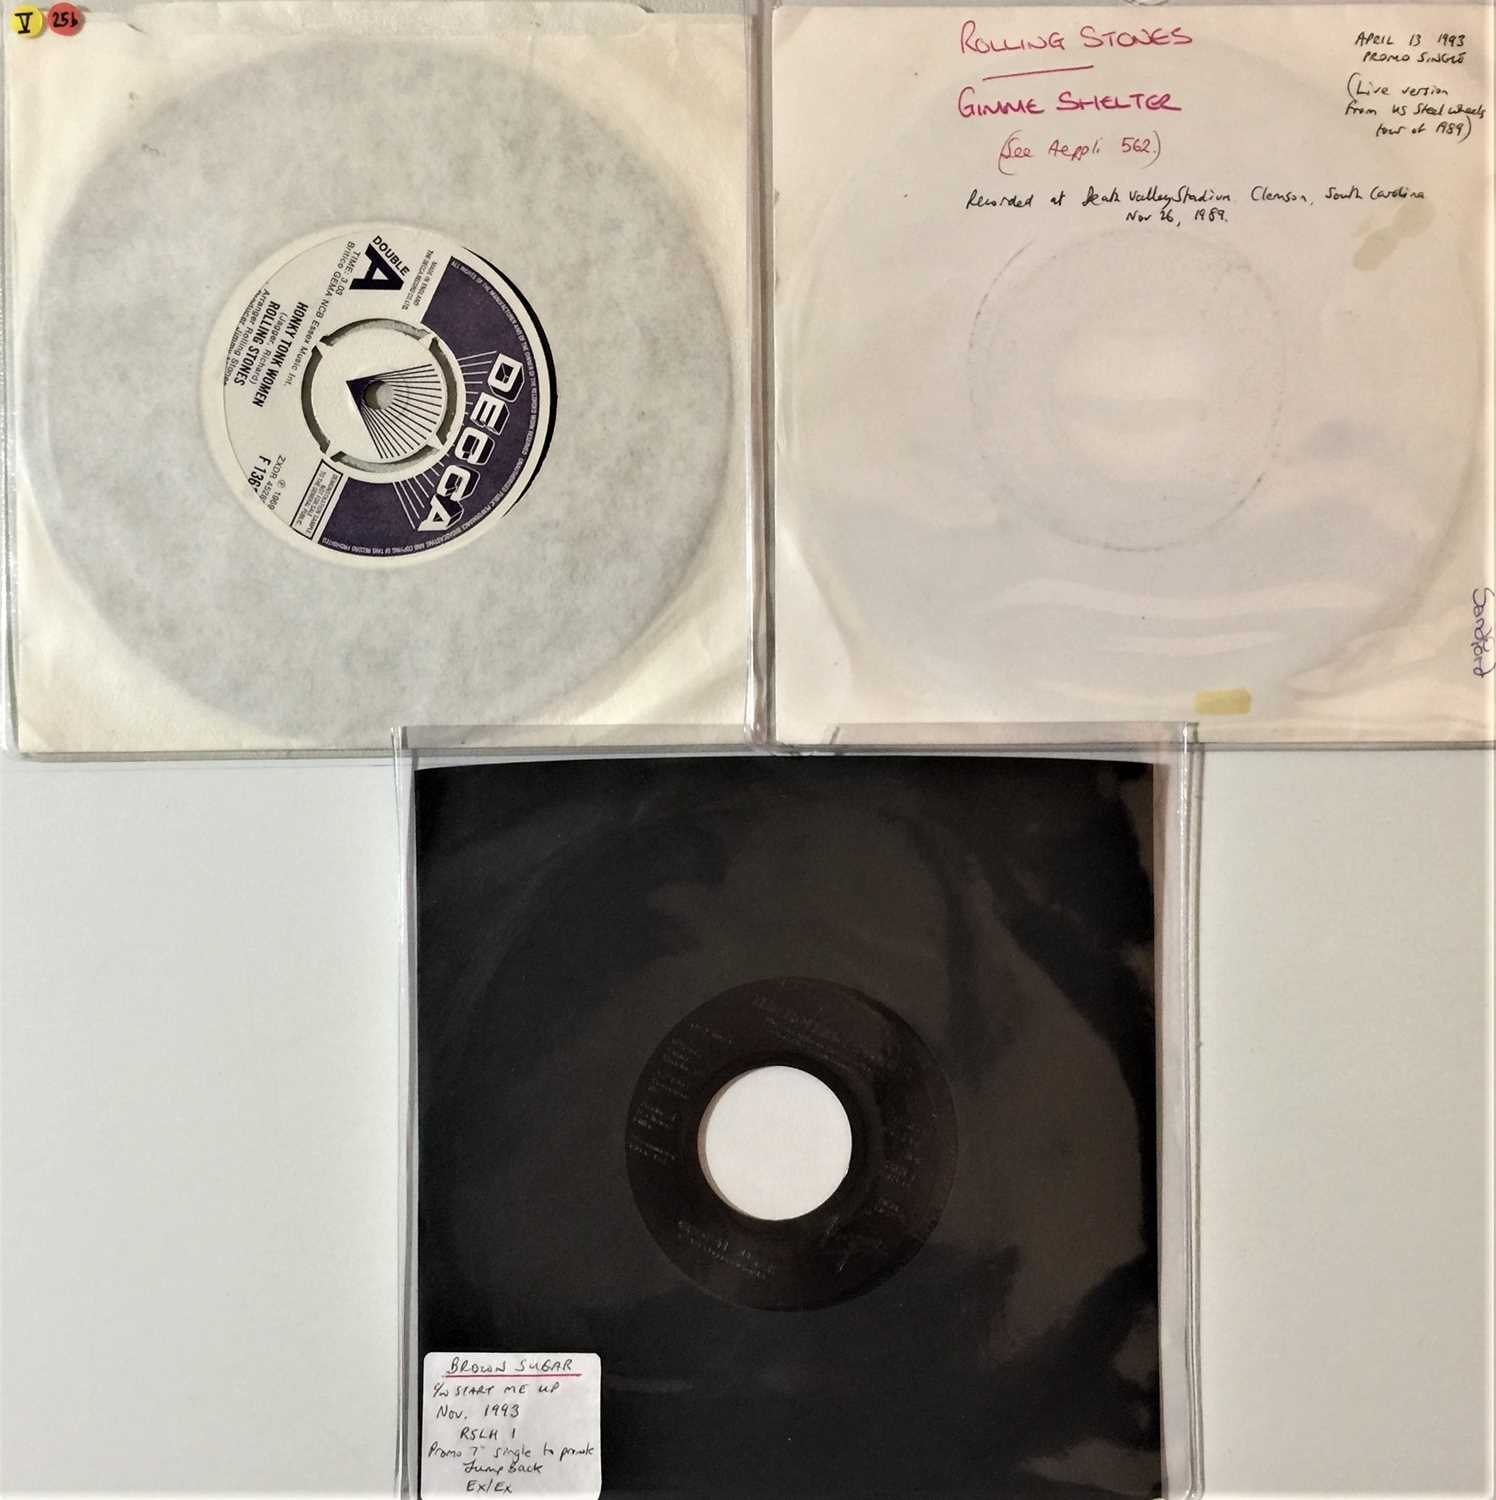 THE ROLLING STONES - 7" DEMOS (70s/80s) - Image 2 of 2